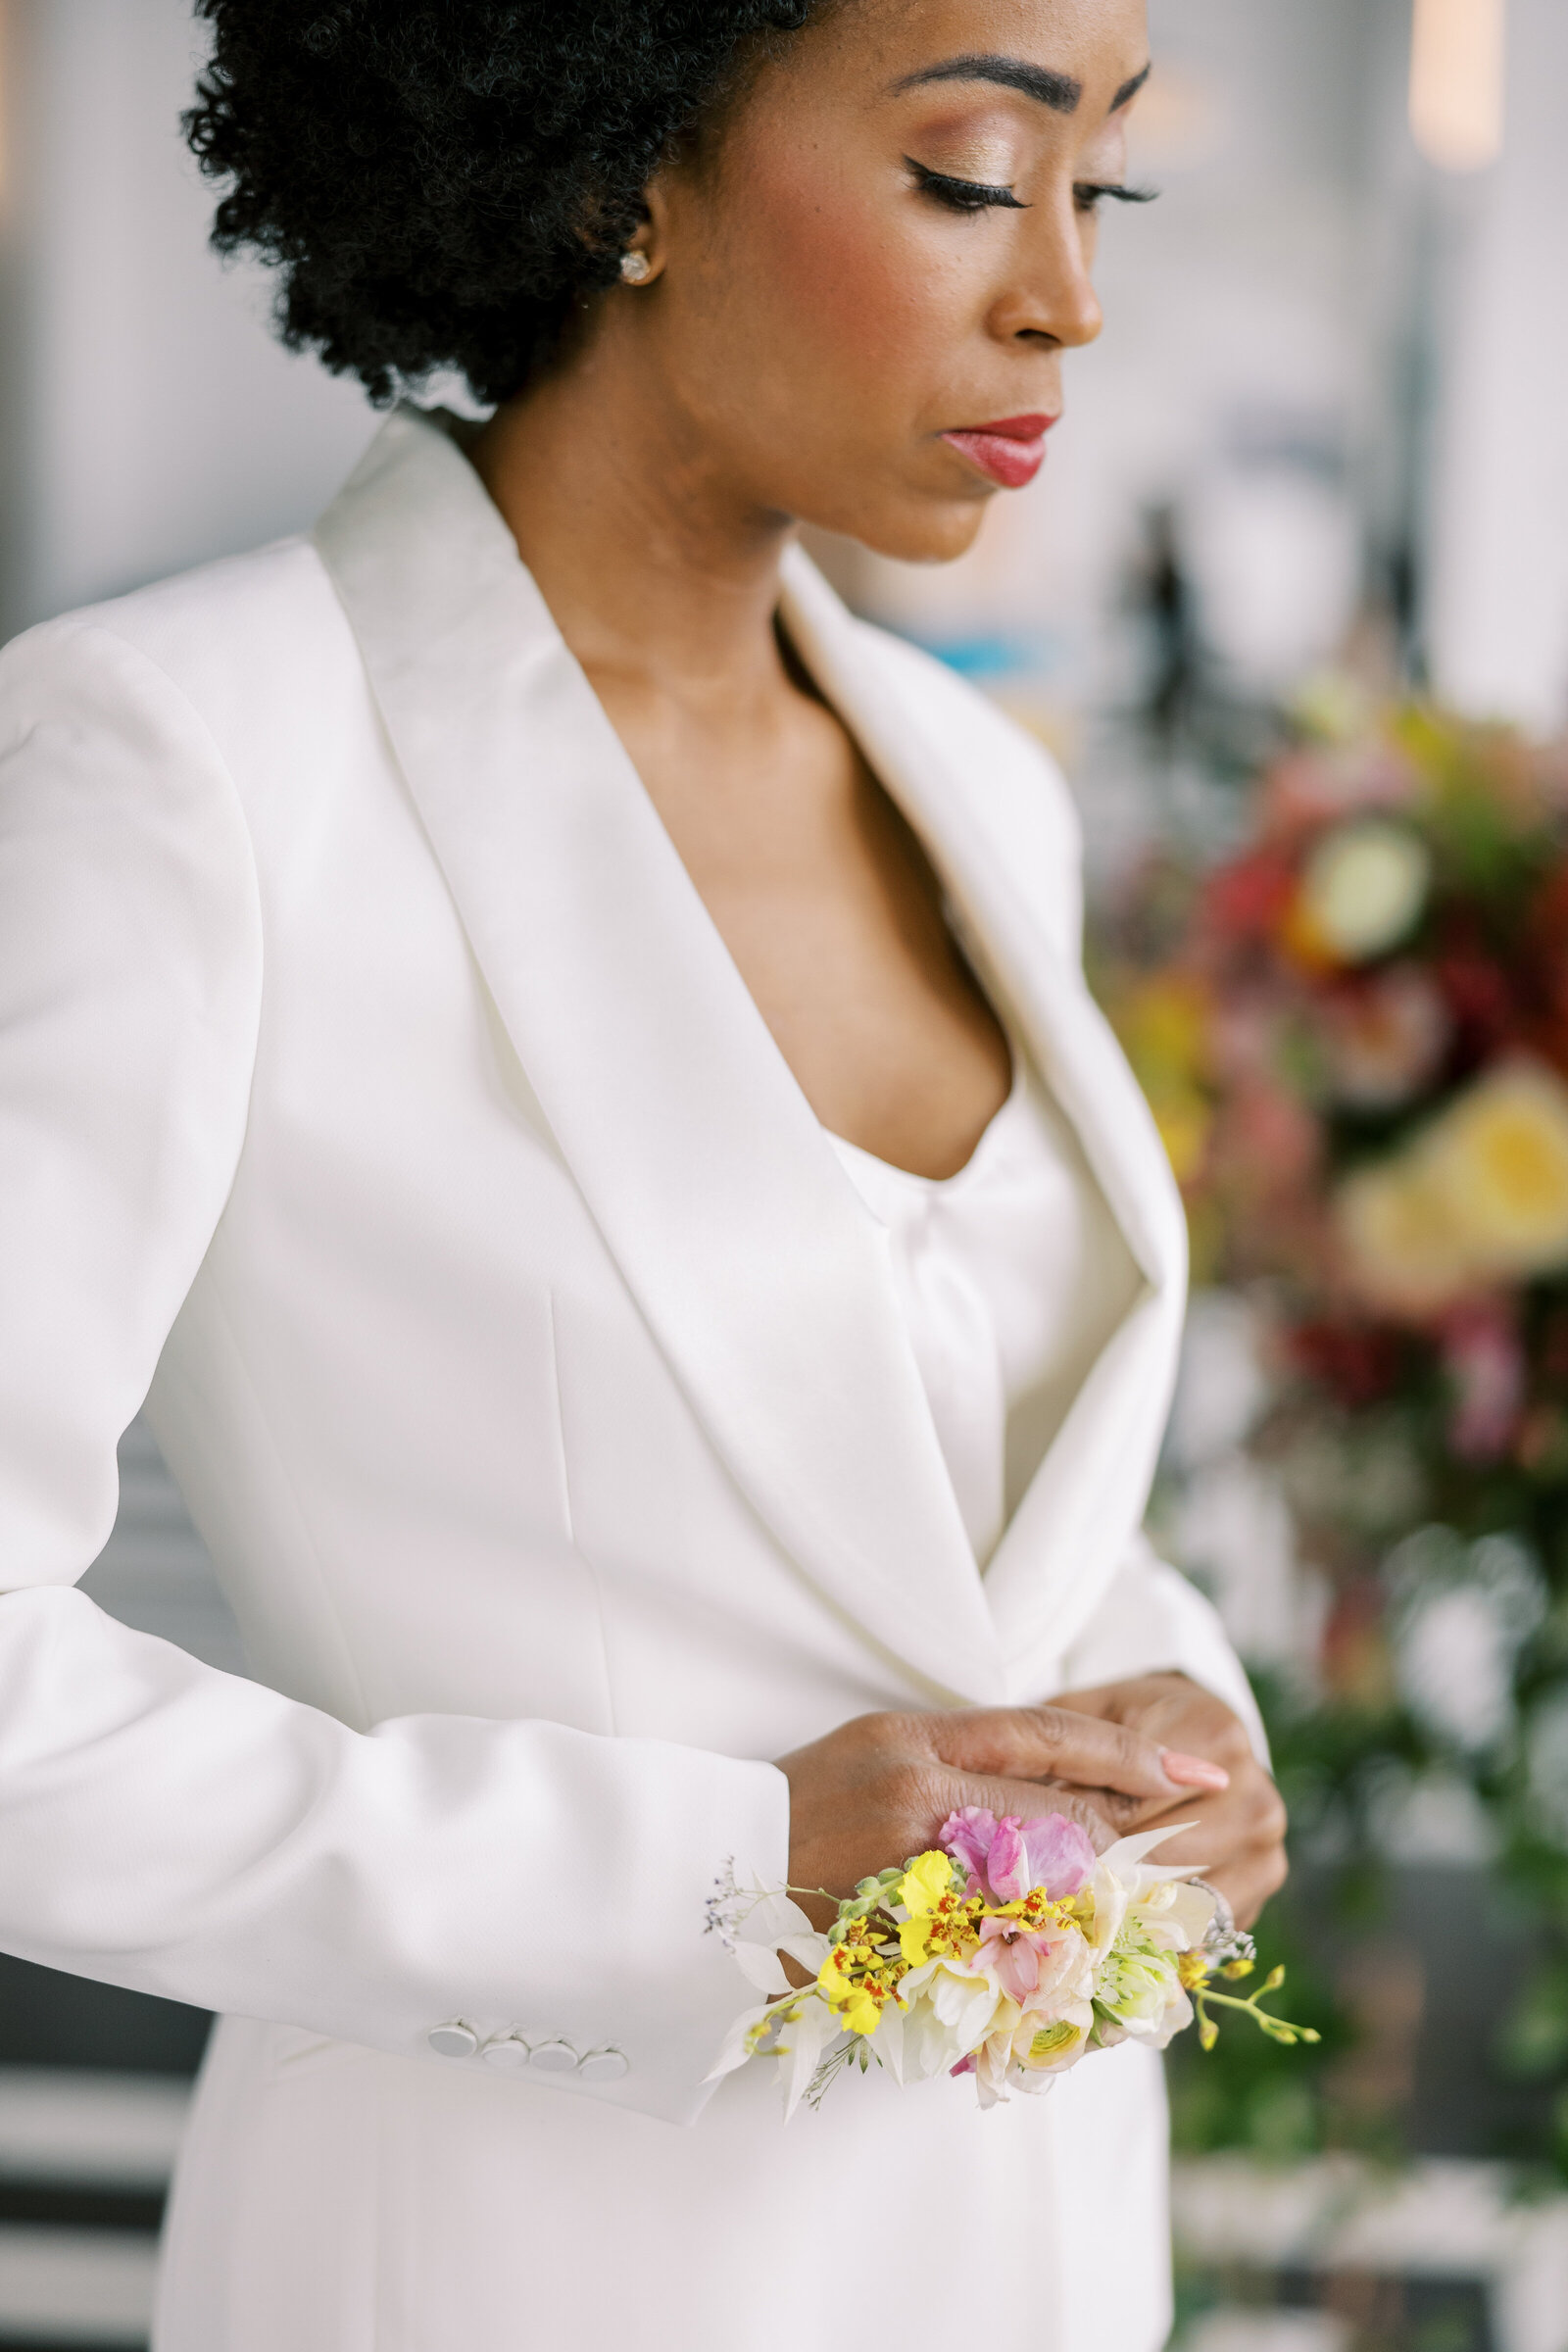 Bride in white jacket with colorful flowers on wrist